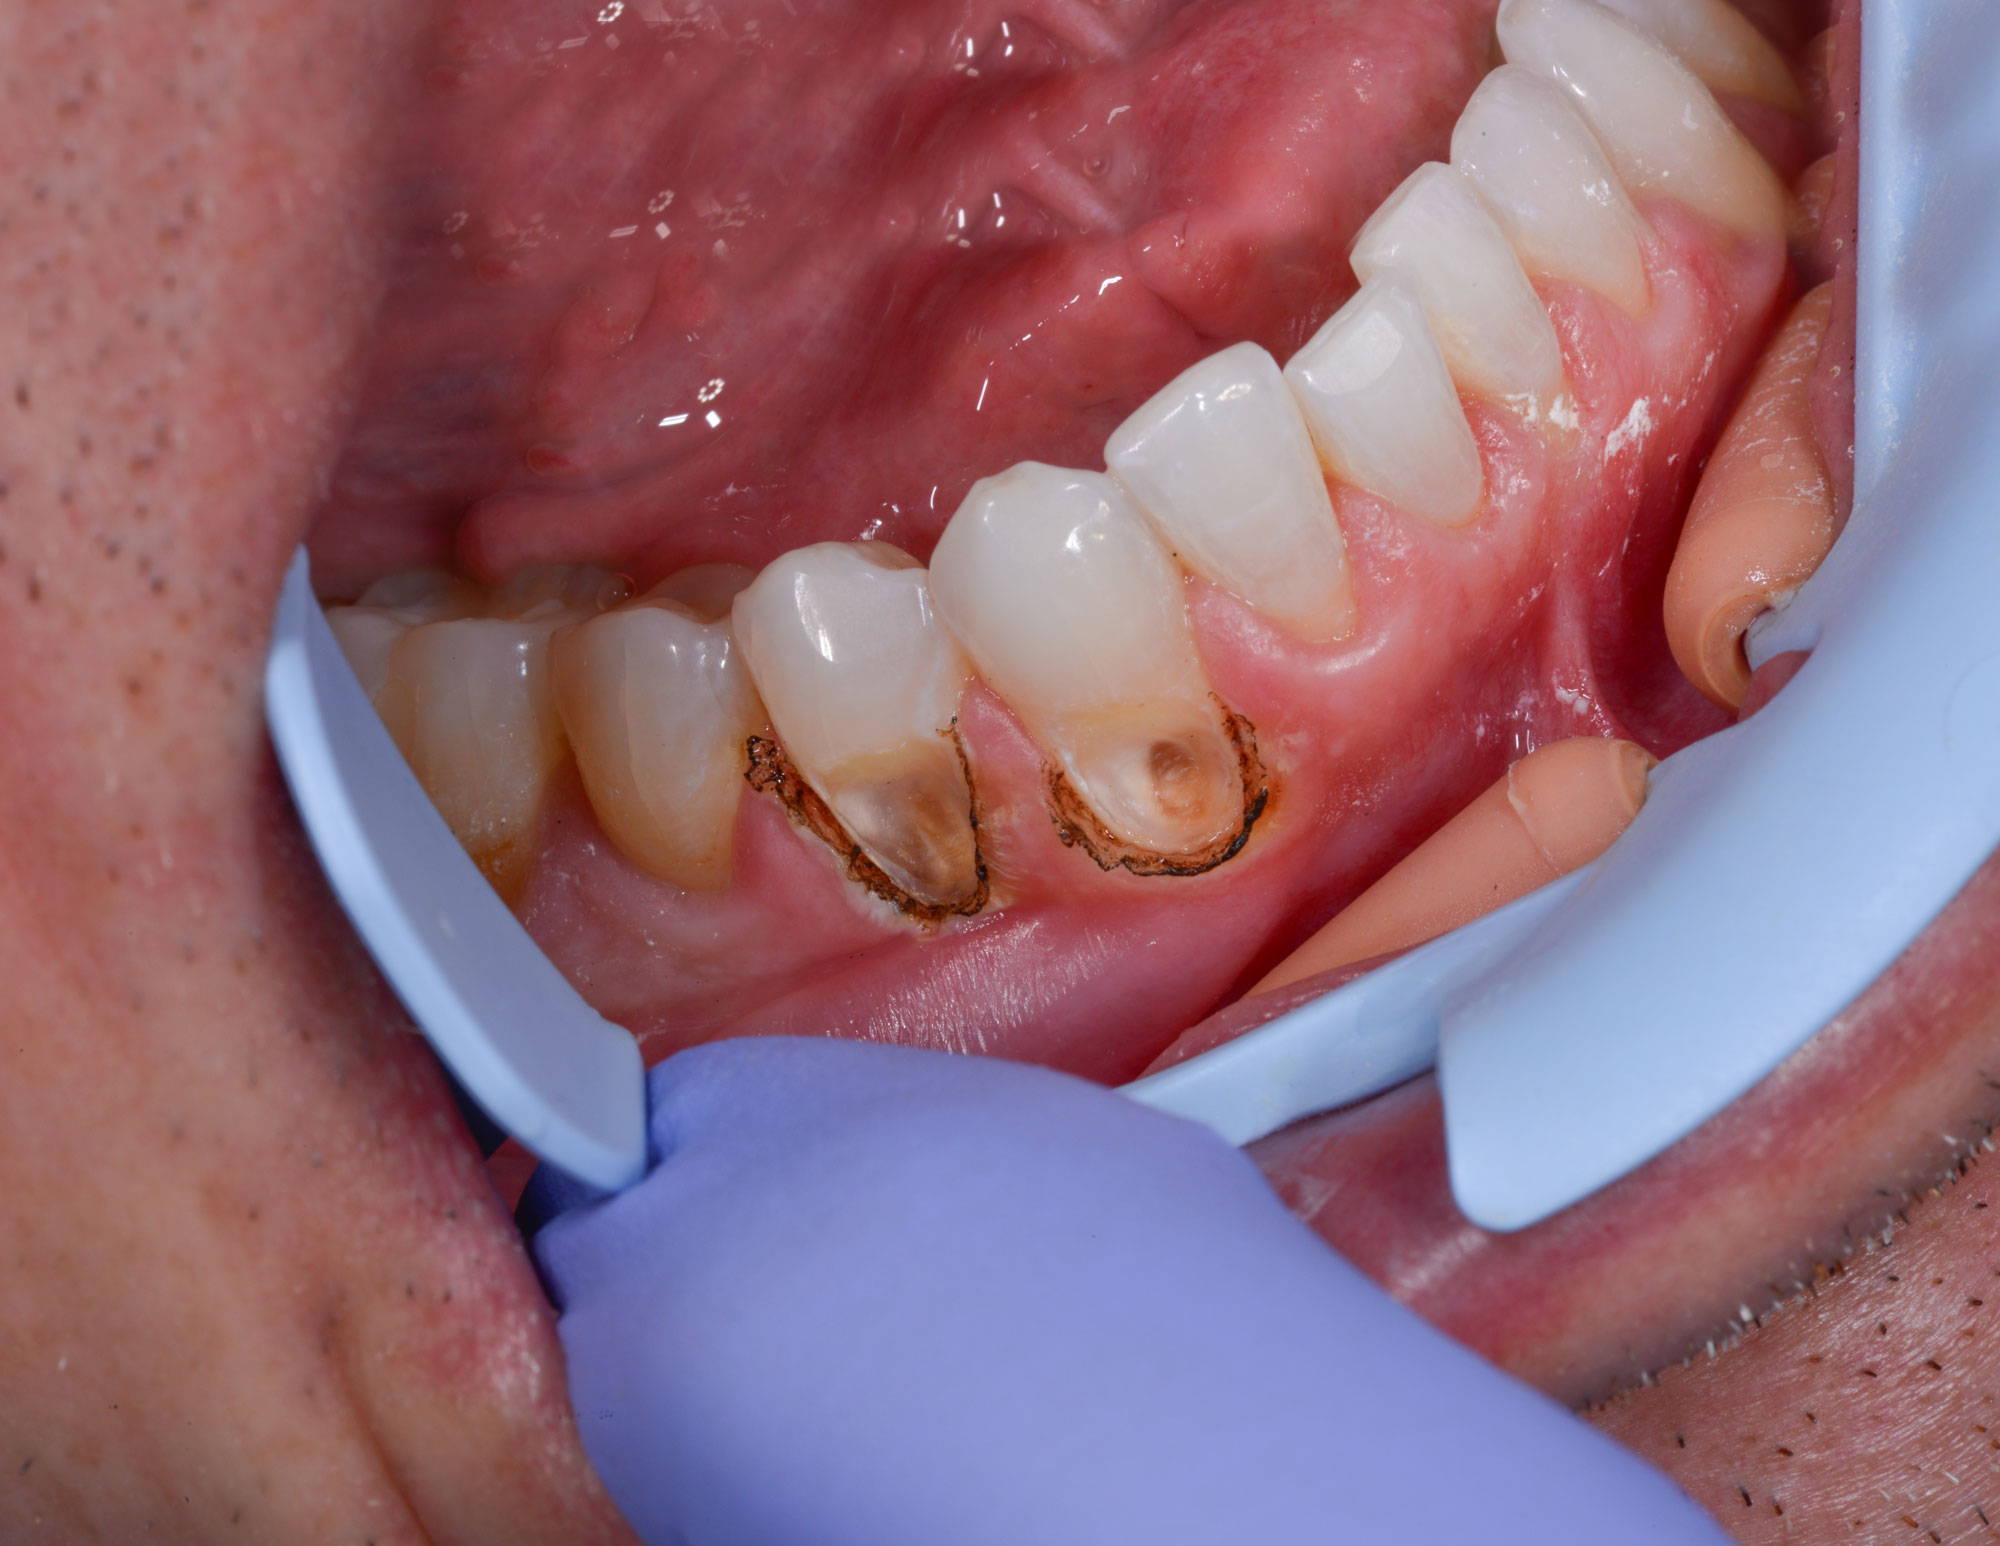 Subgingival decay exposed with burnt gums around it